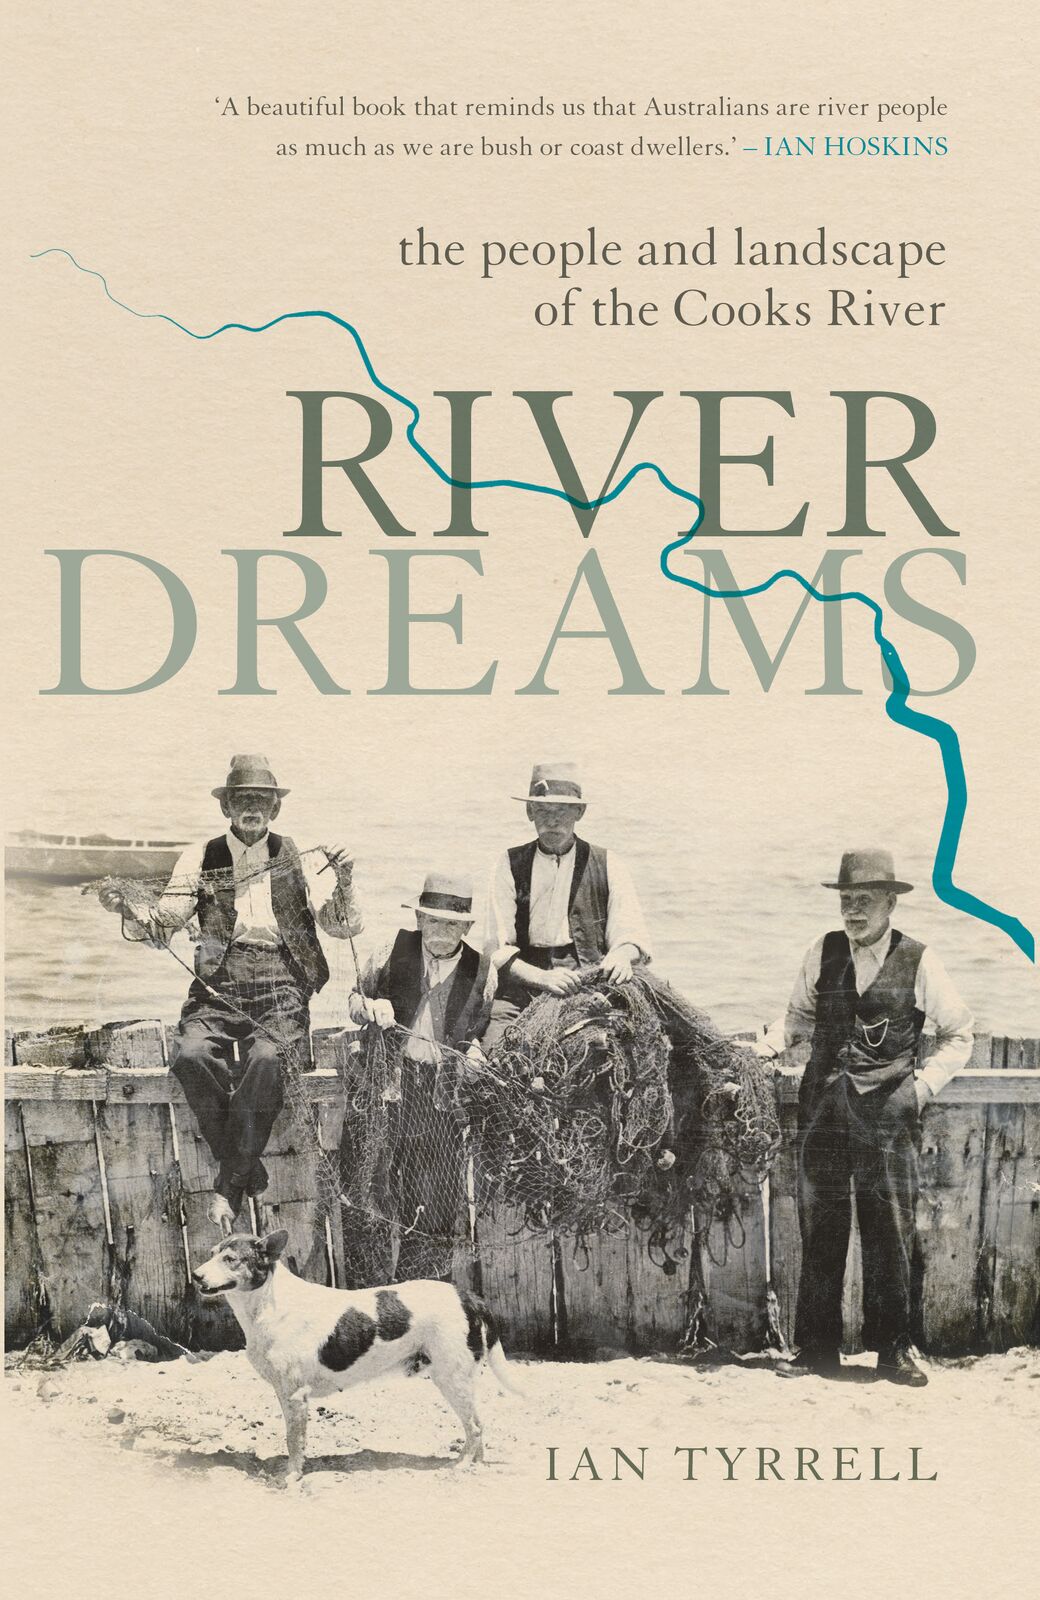 River Dreams: the people and landscapes of the Cooks River